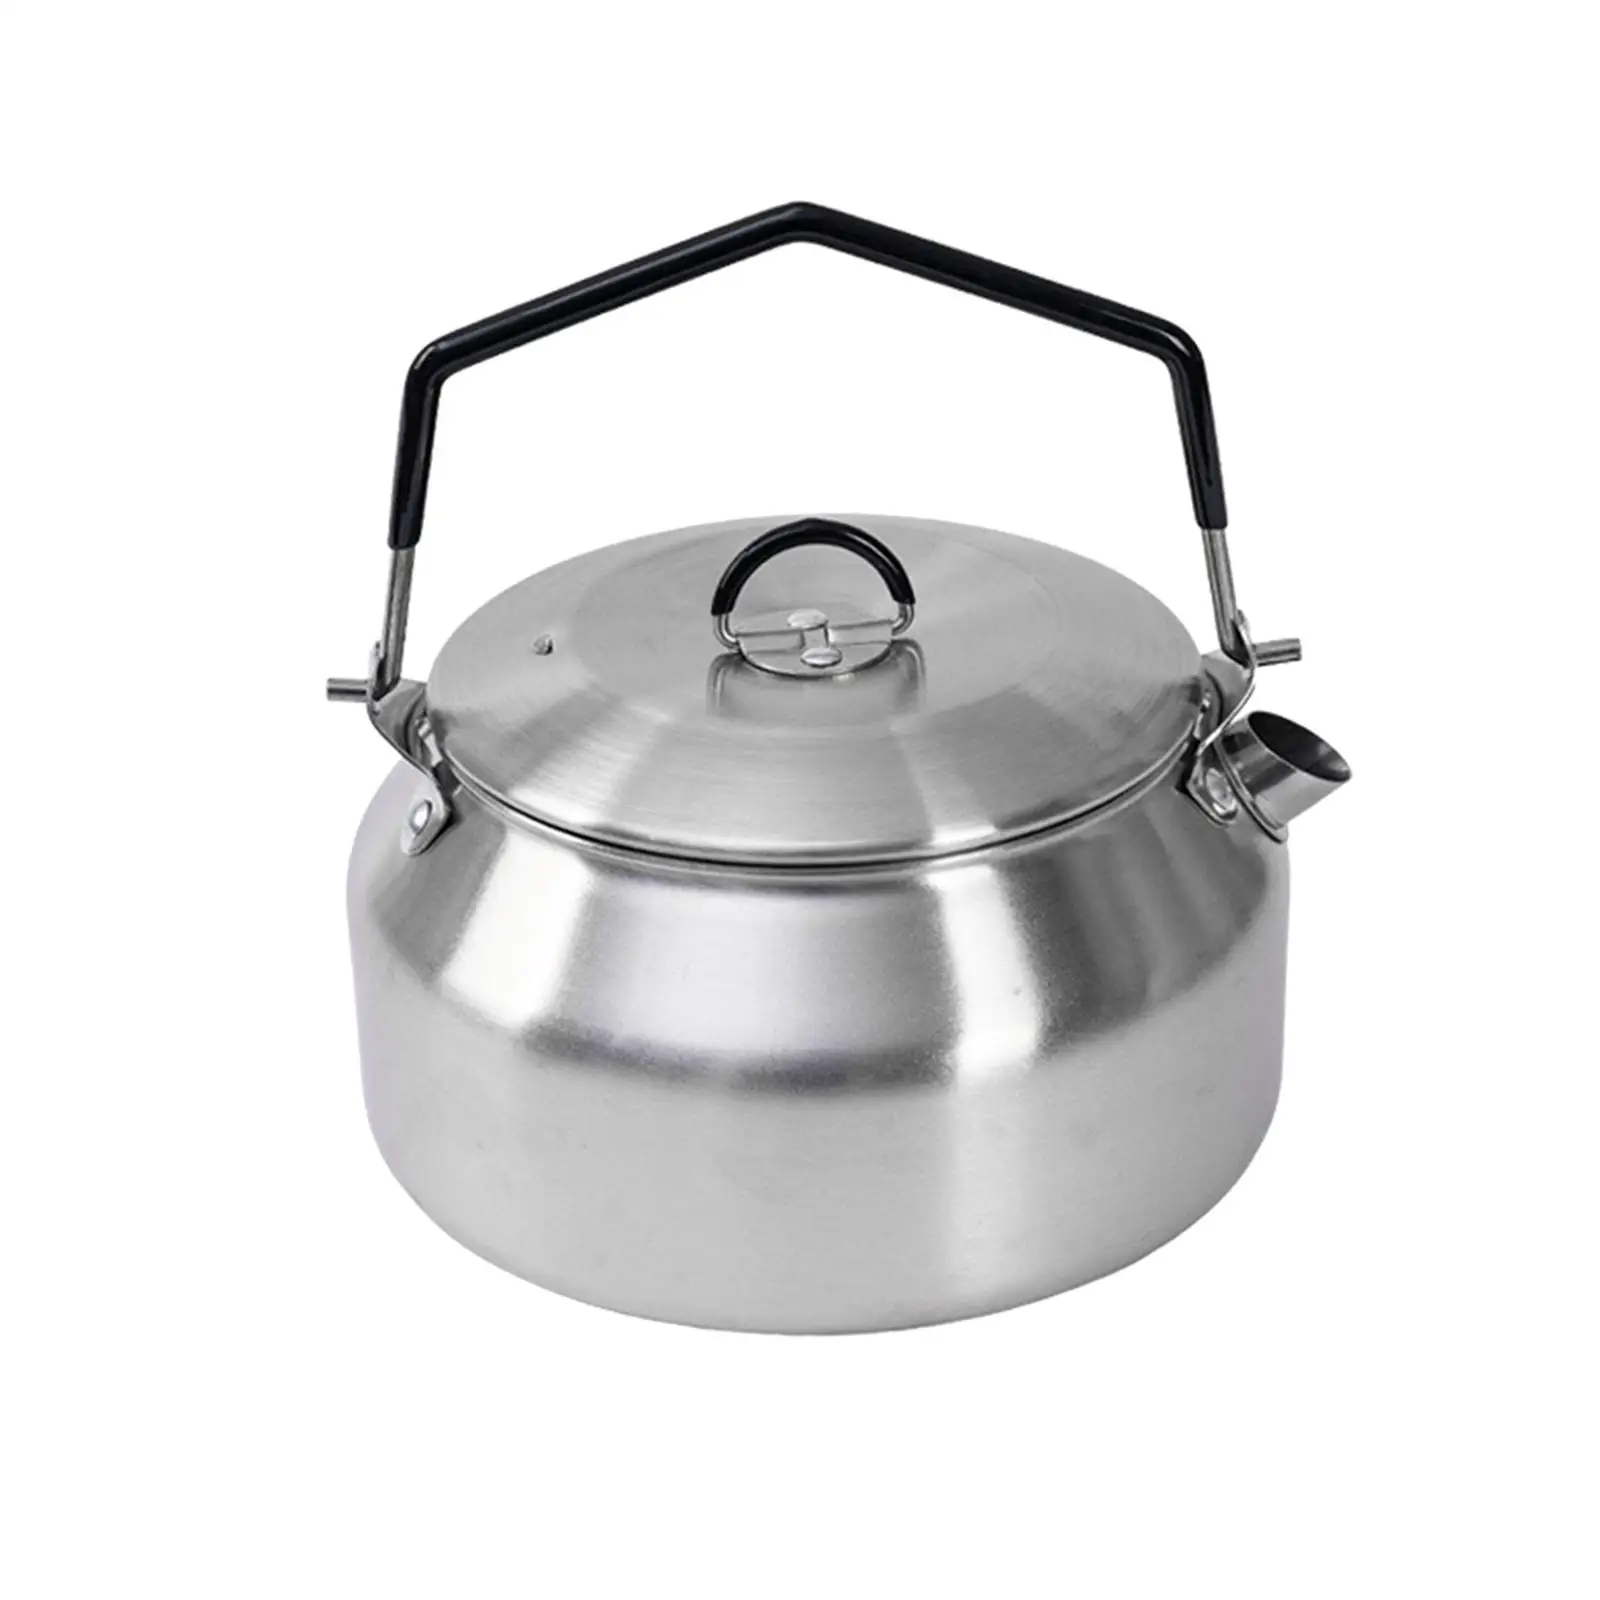 Camping Water Kettle Teapot Kitchen Anti Scald and Lockable Handle Portable Tea Pot for Outdoor Hiking Campfire Travel Barbecue